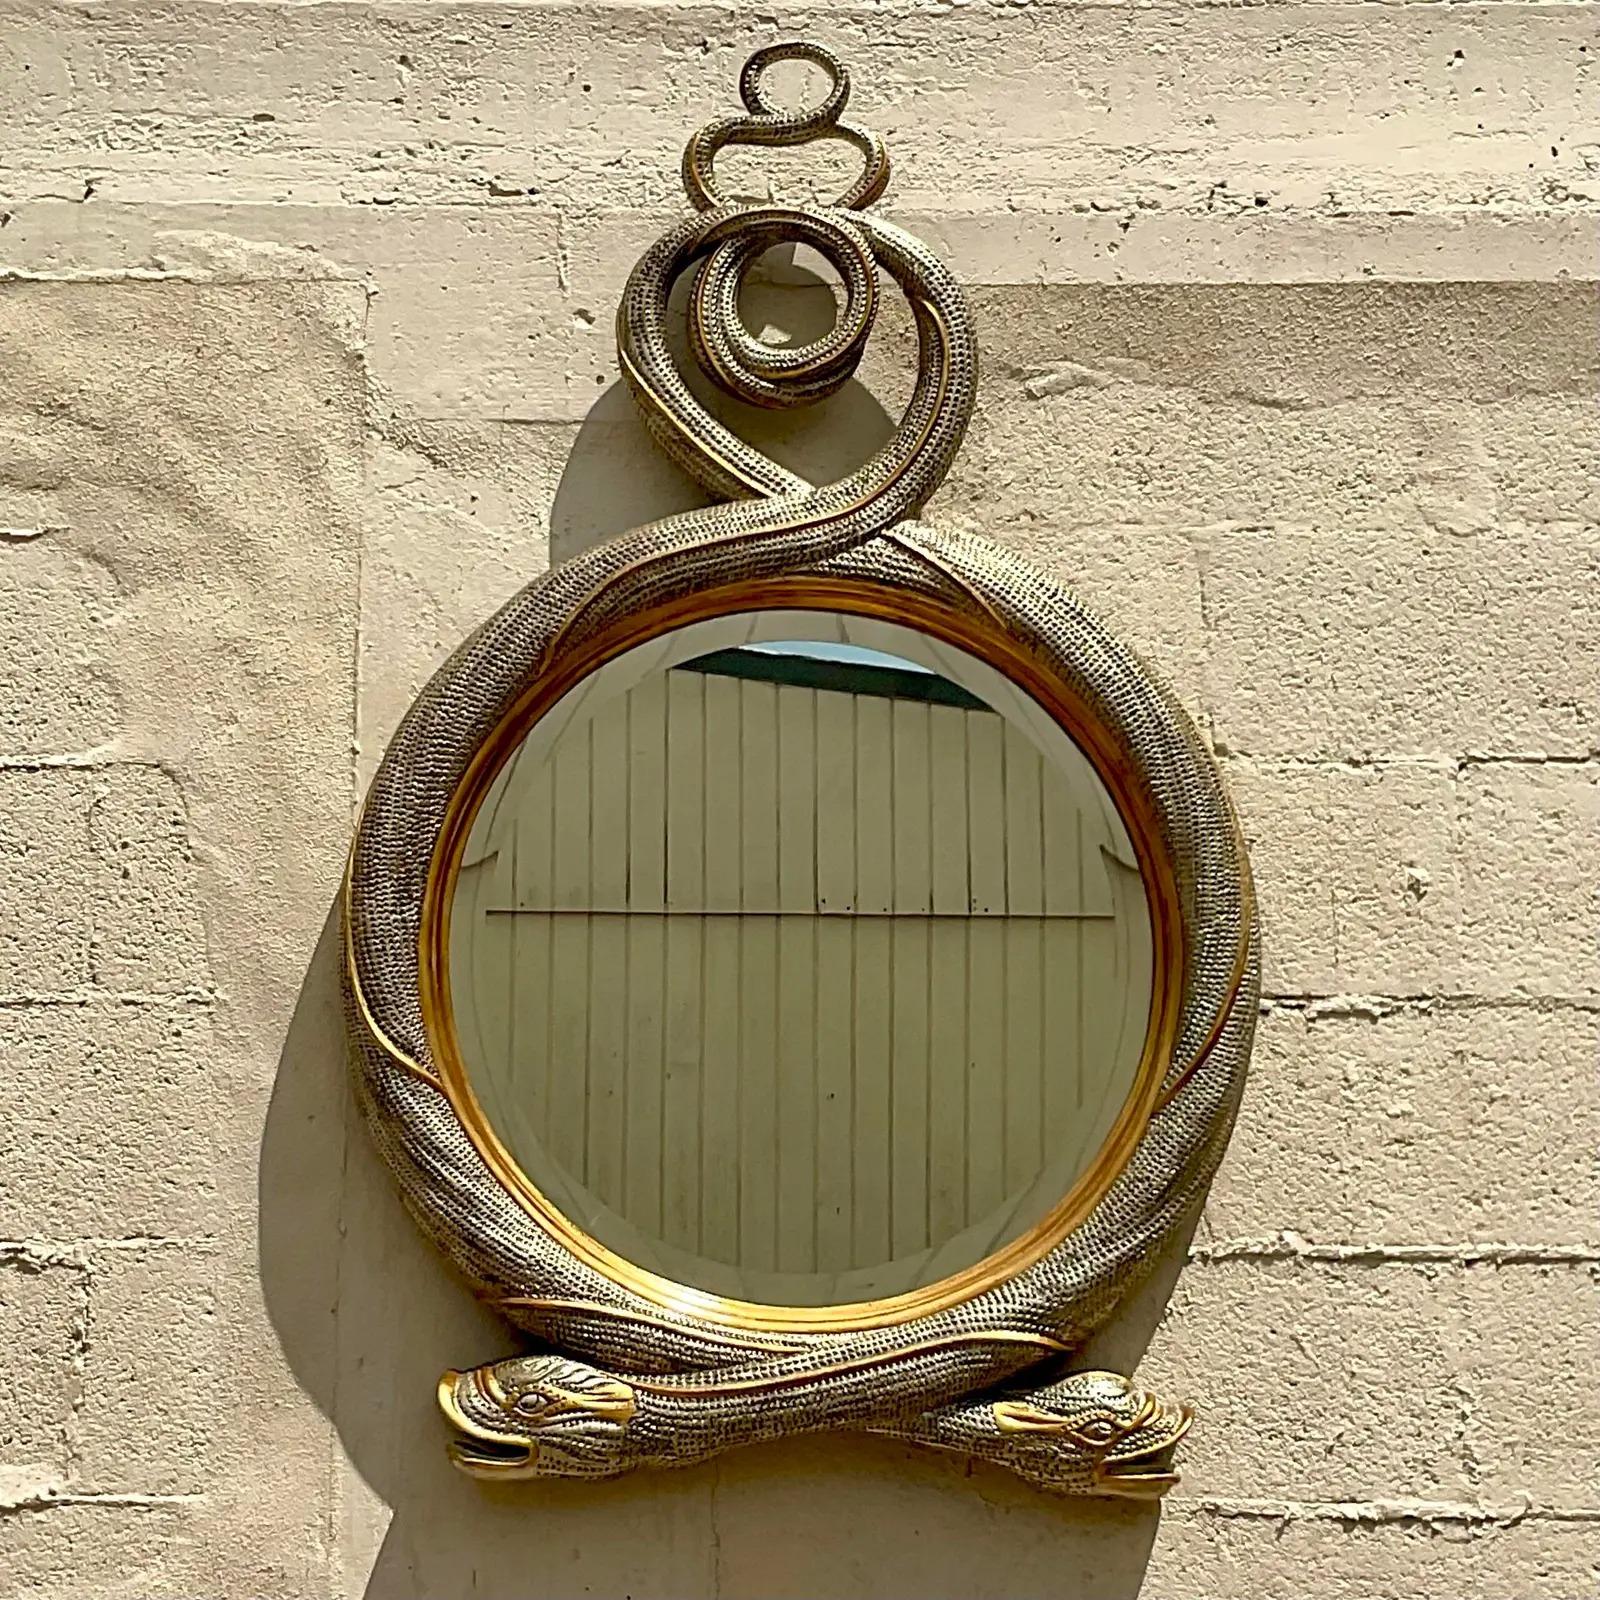 Fantastic vintage Regency mirror. A stunning Maitland Smith mirror with a twisted Serpent design. A chic gilt finish in silver and gold. Incredible attention to detail. Acquired from a Palm Beach estate.